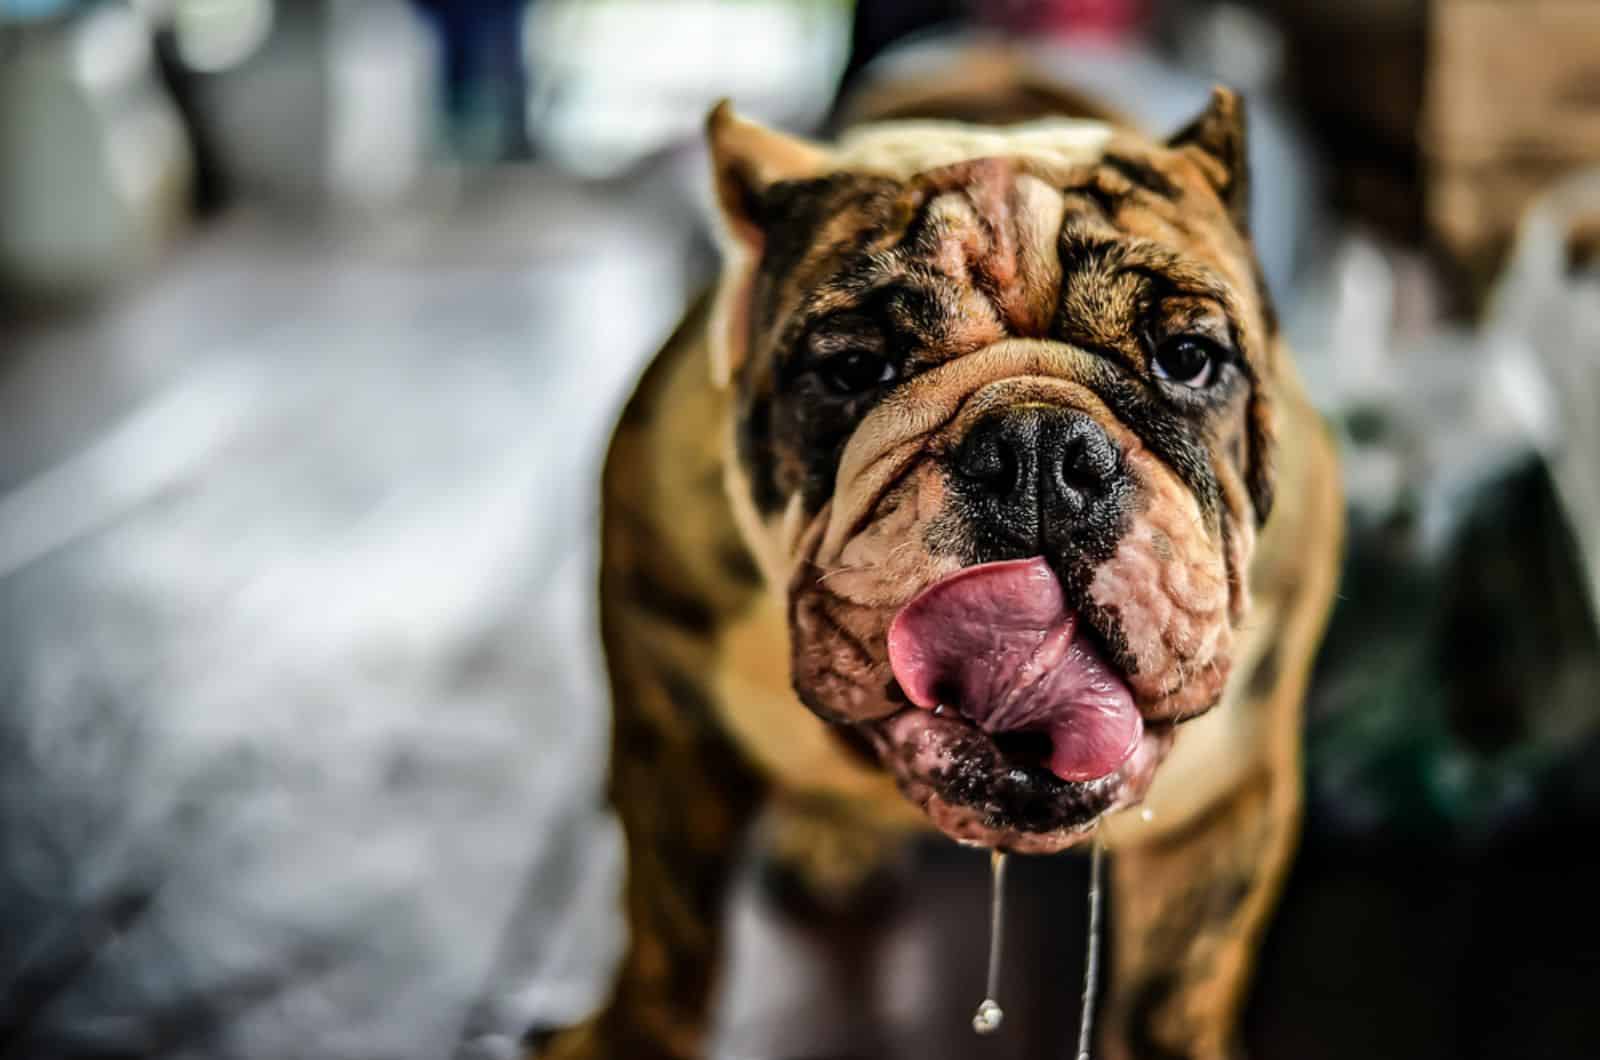 13 Dog Breeds That Drool A Lot